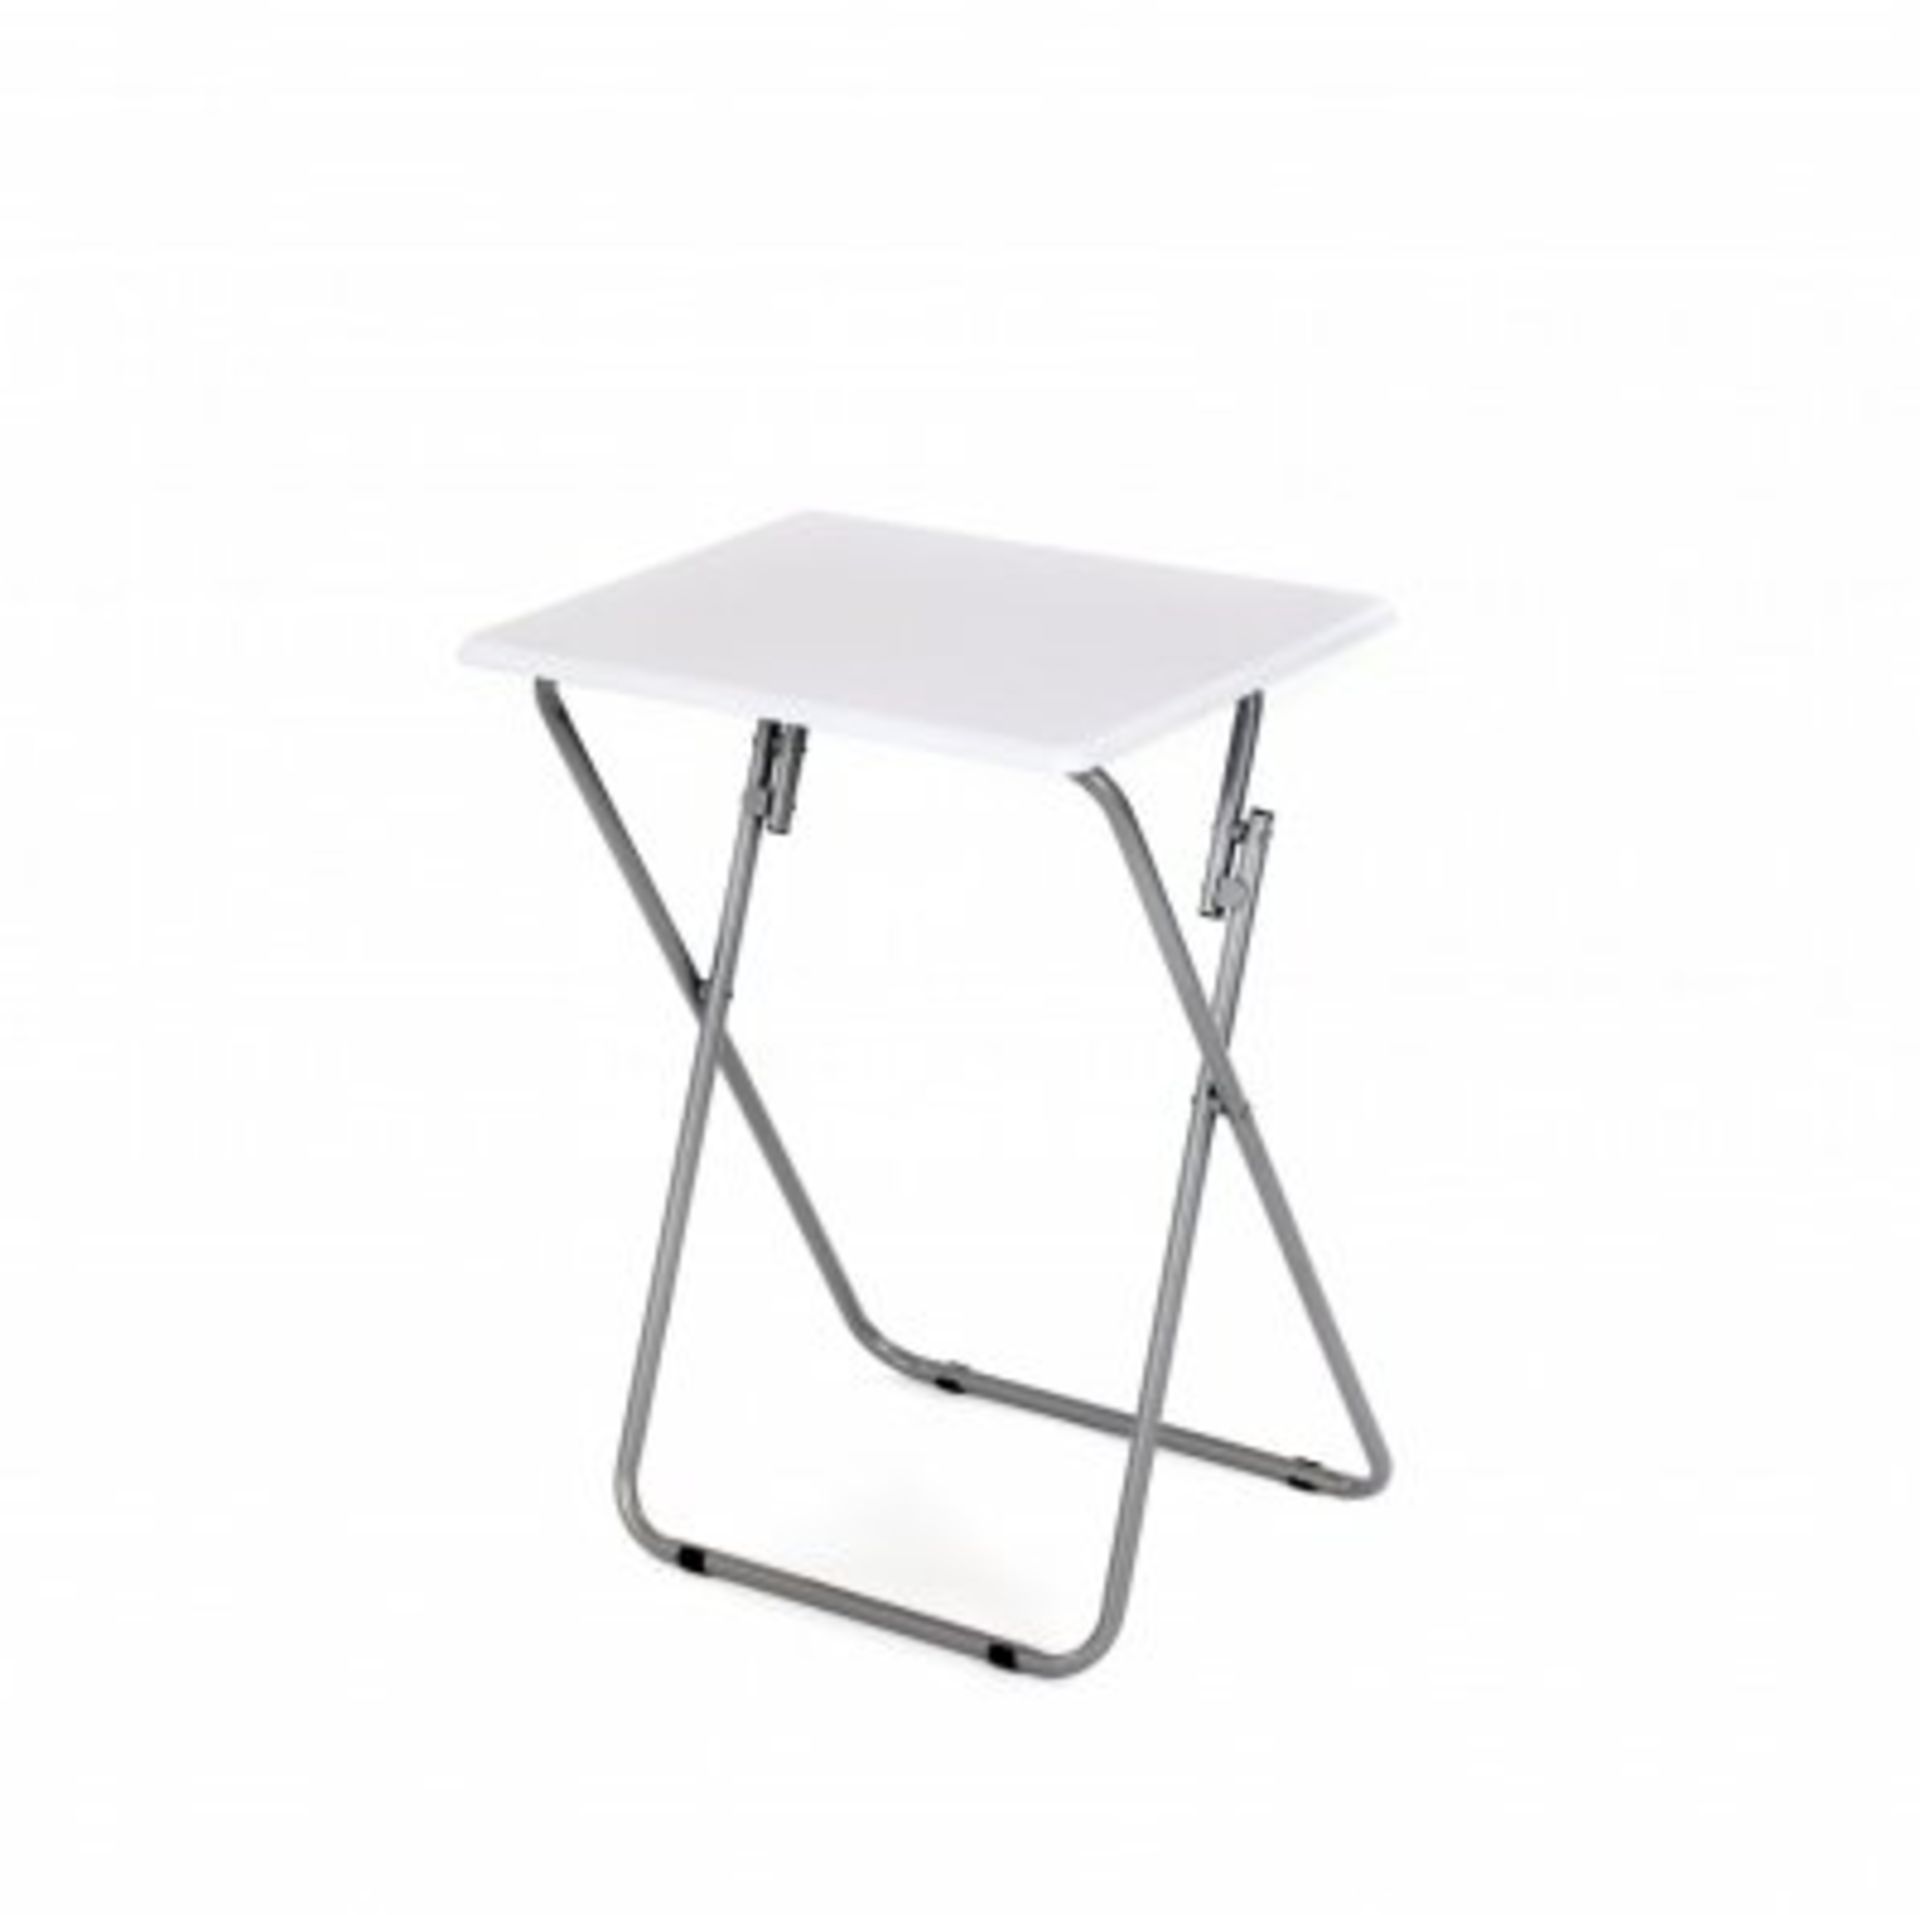 (LF24) Lightweight Portable Folding Snack Laptop TV Tray Table Desk The folding table is ide...